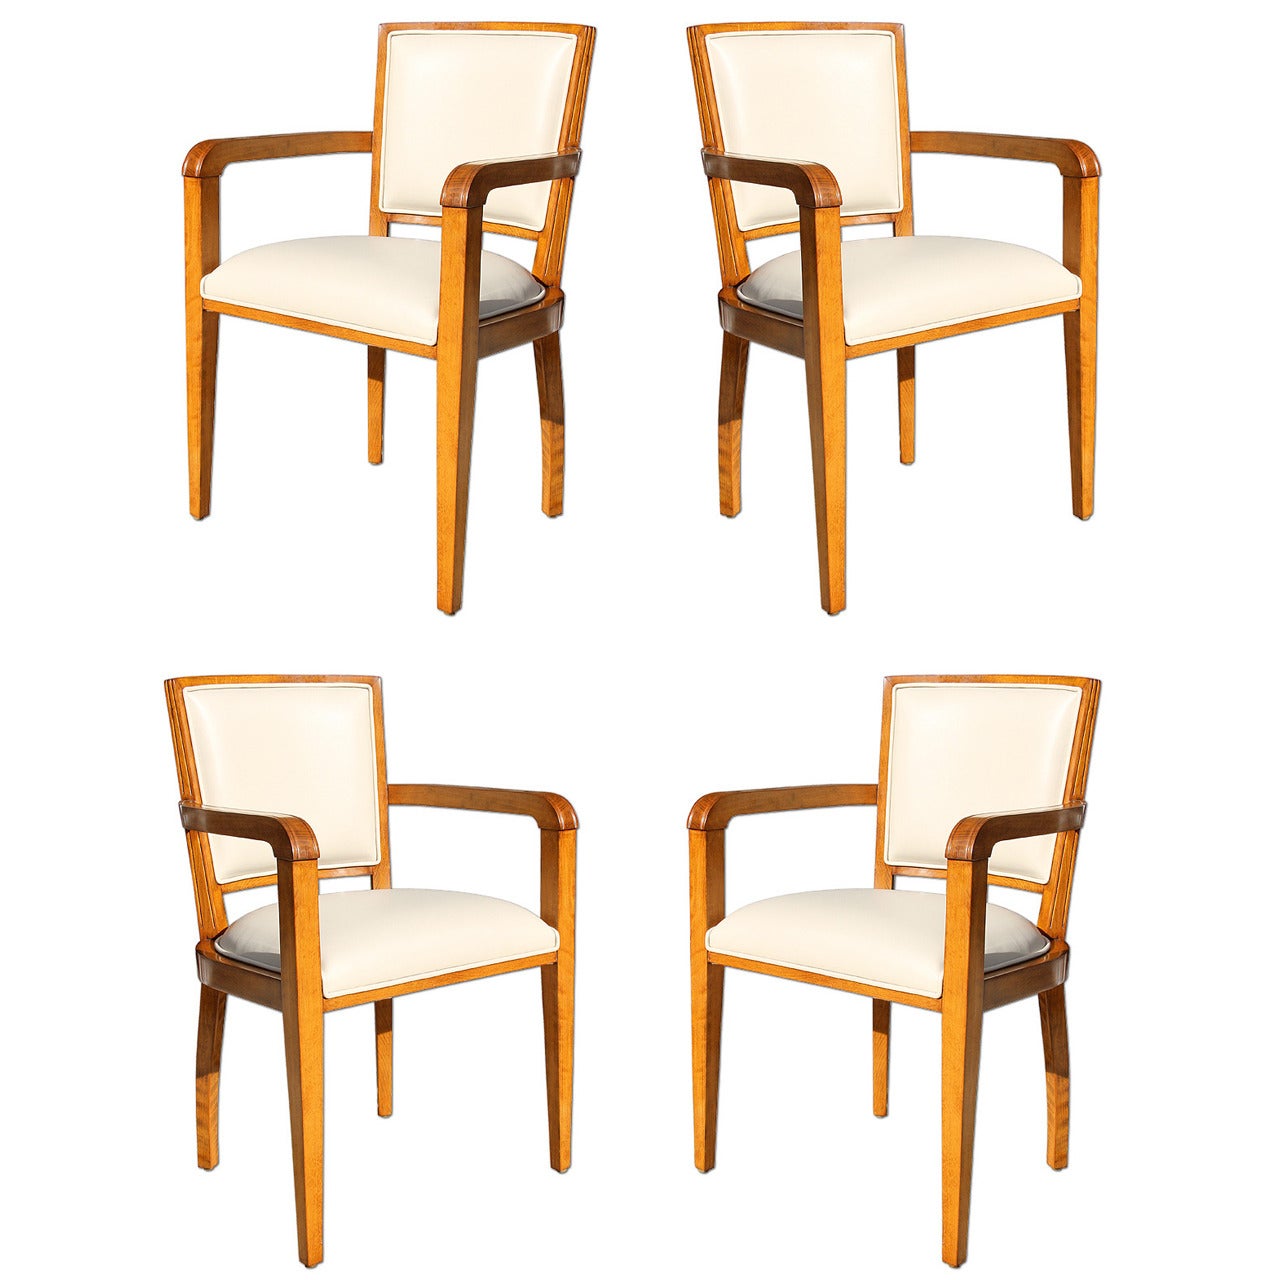 Rare Set of Four 1940s French Art Deco Armchairs, Stamped